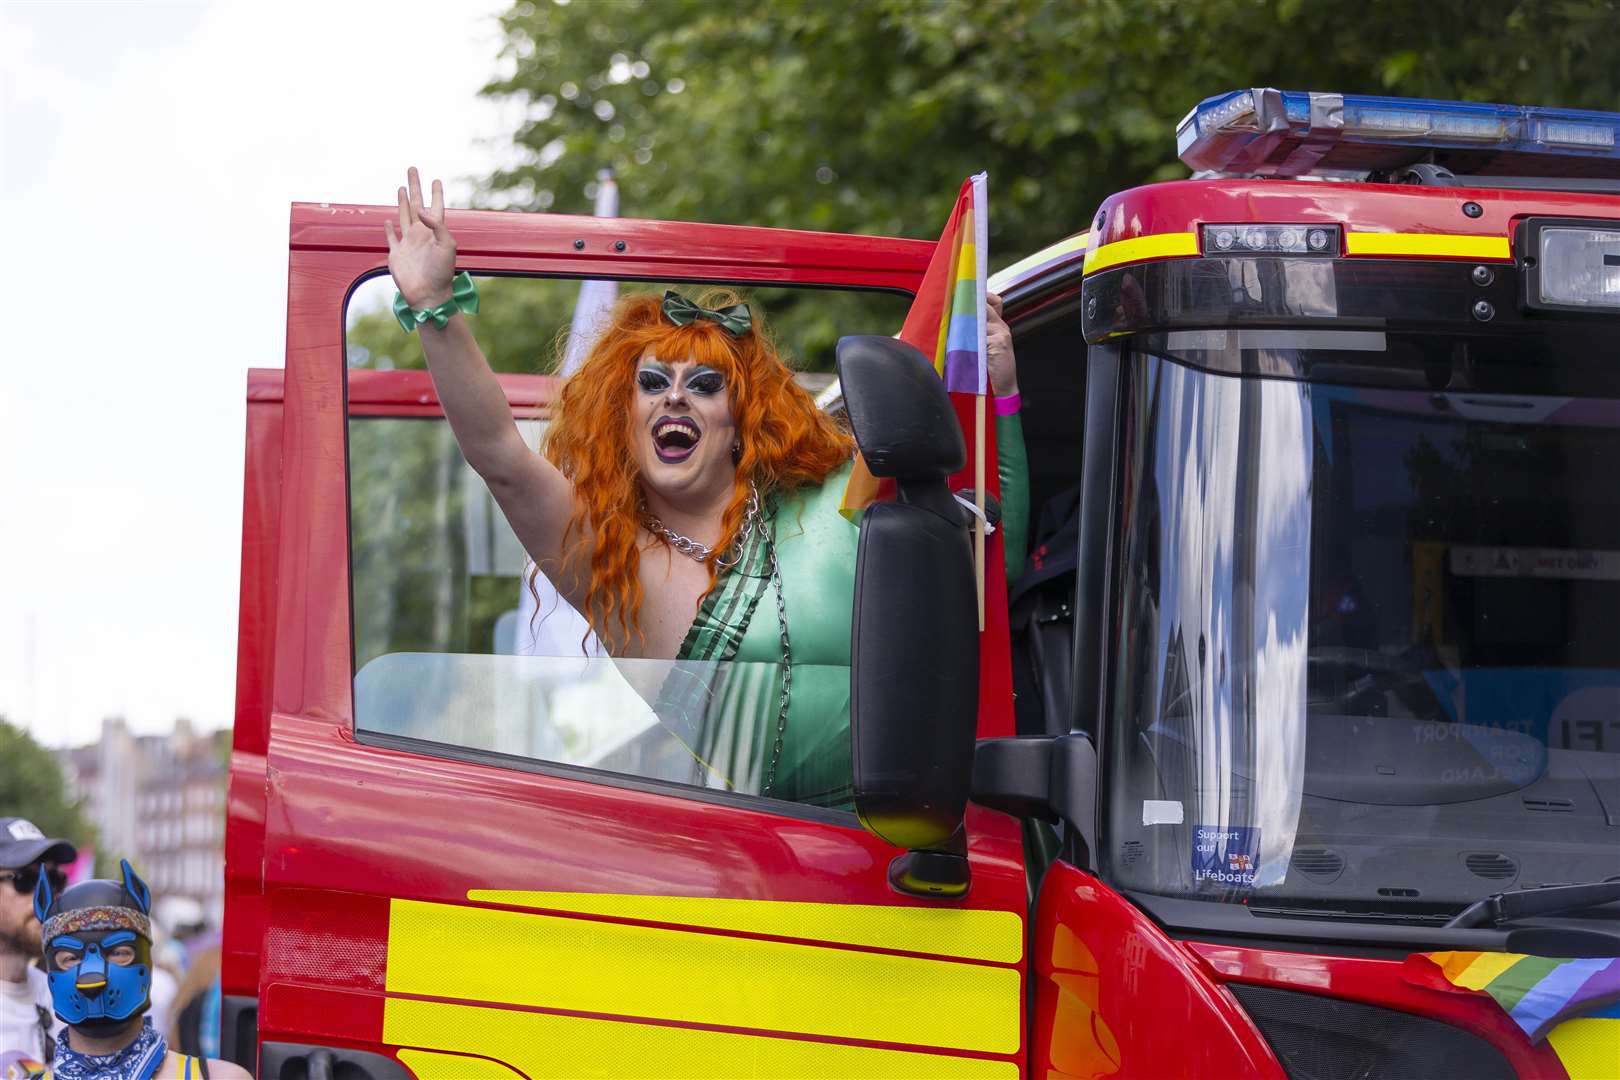 Letitia Delish takes part in the Dublin Pride Parade, which was taking place for the first time since the start of the pandemic (Gary Ashe/PA)